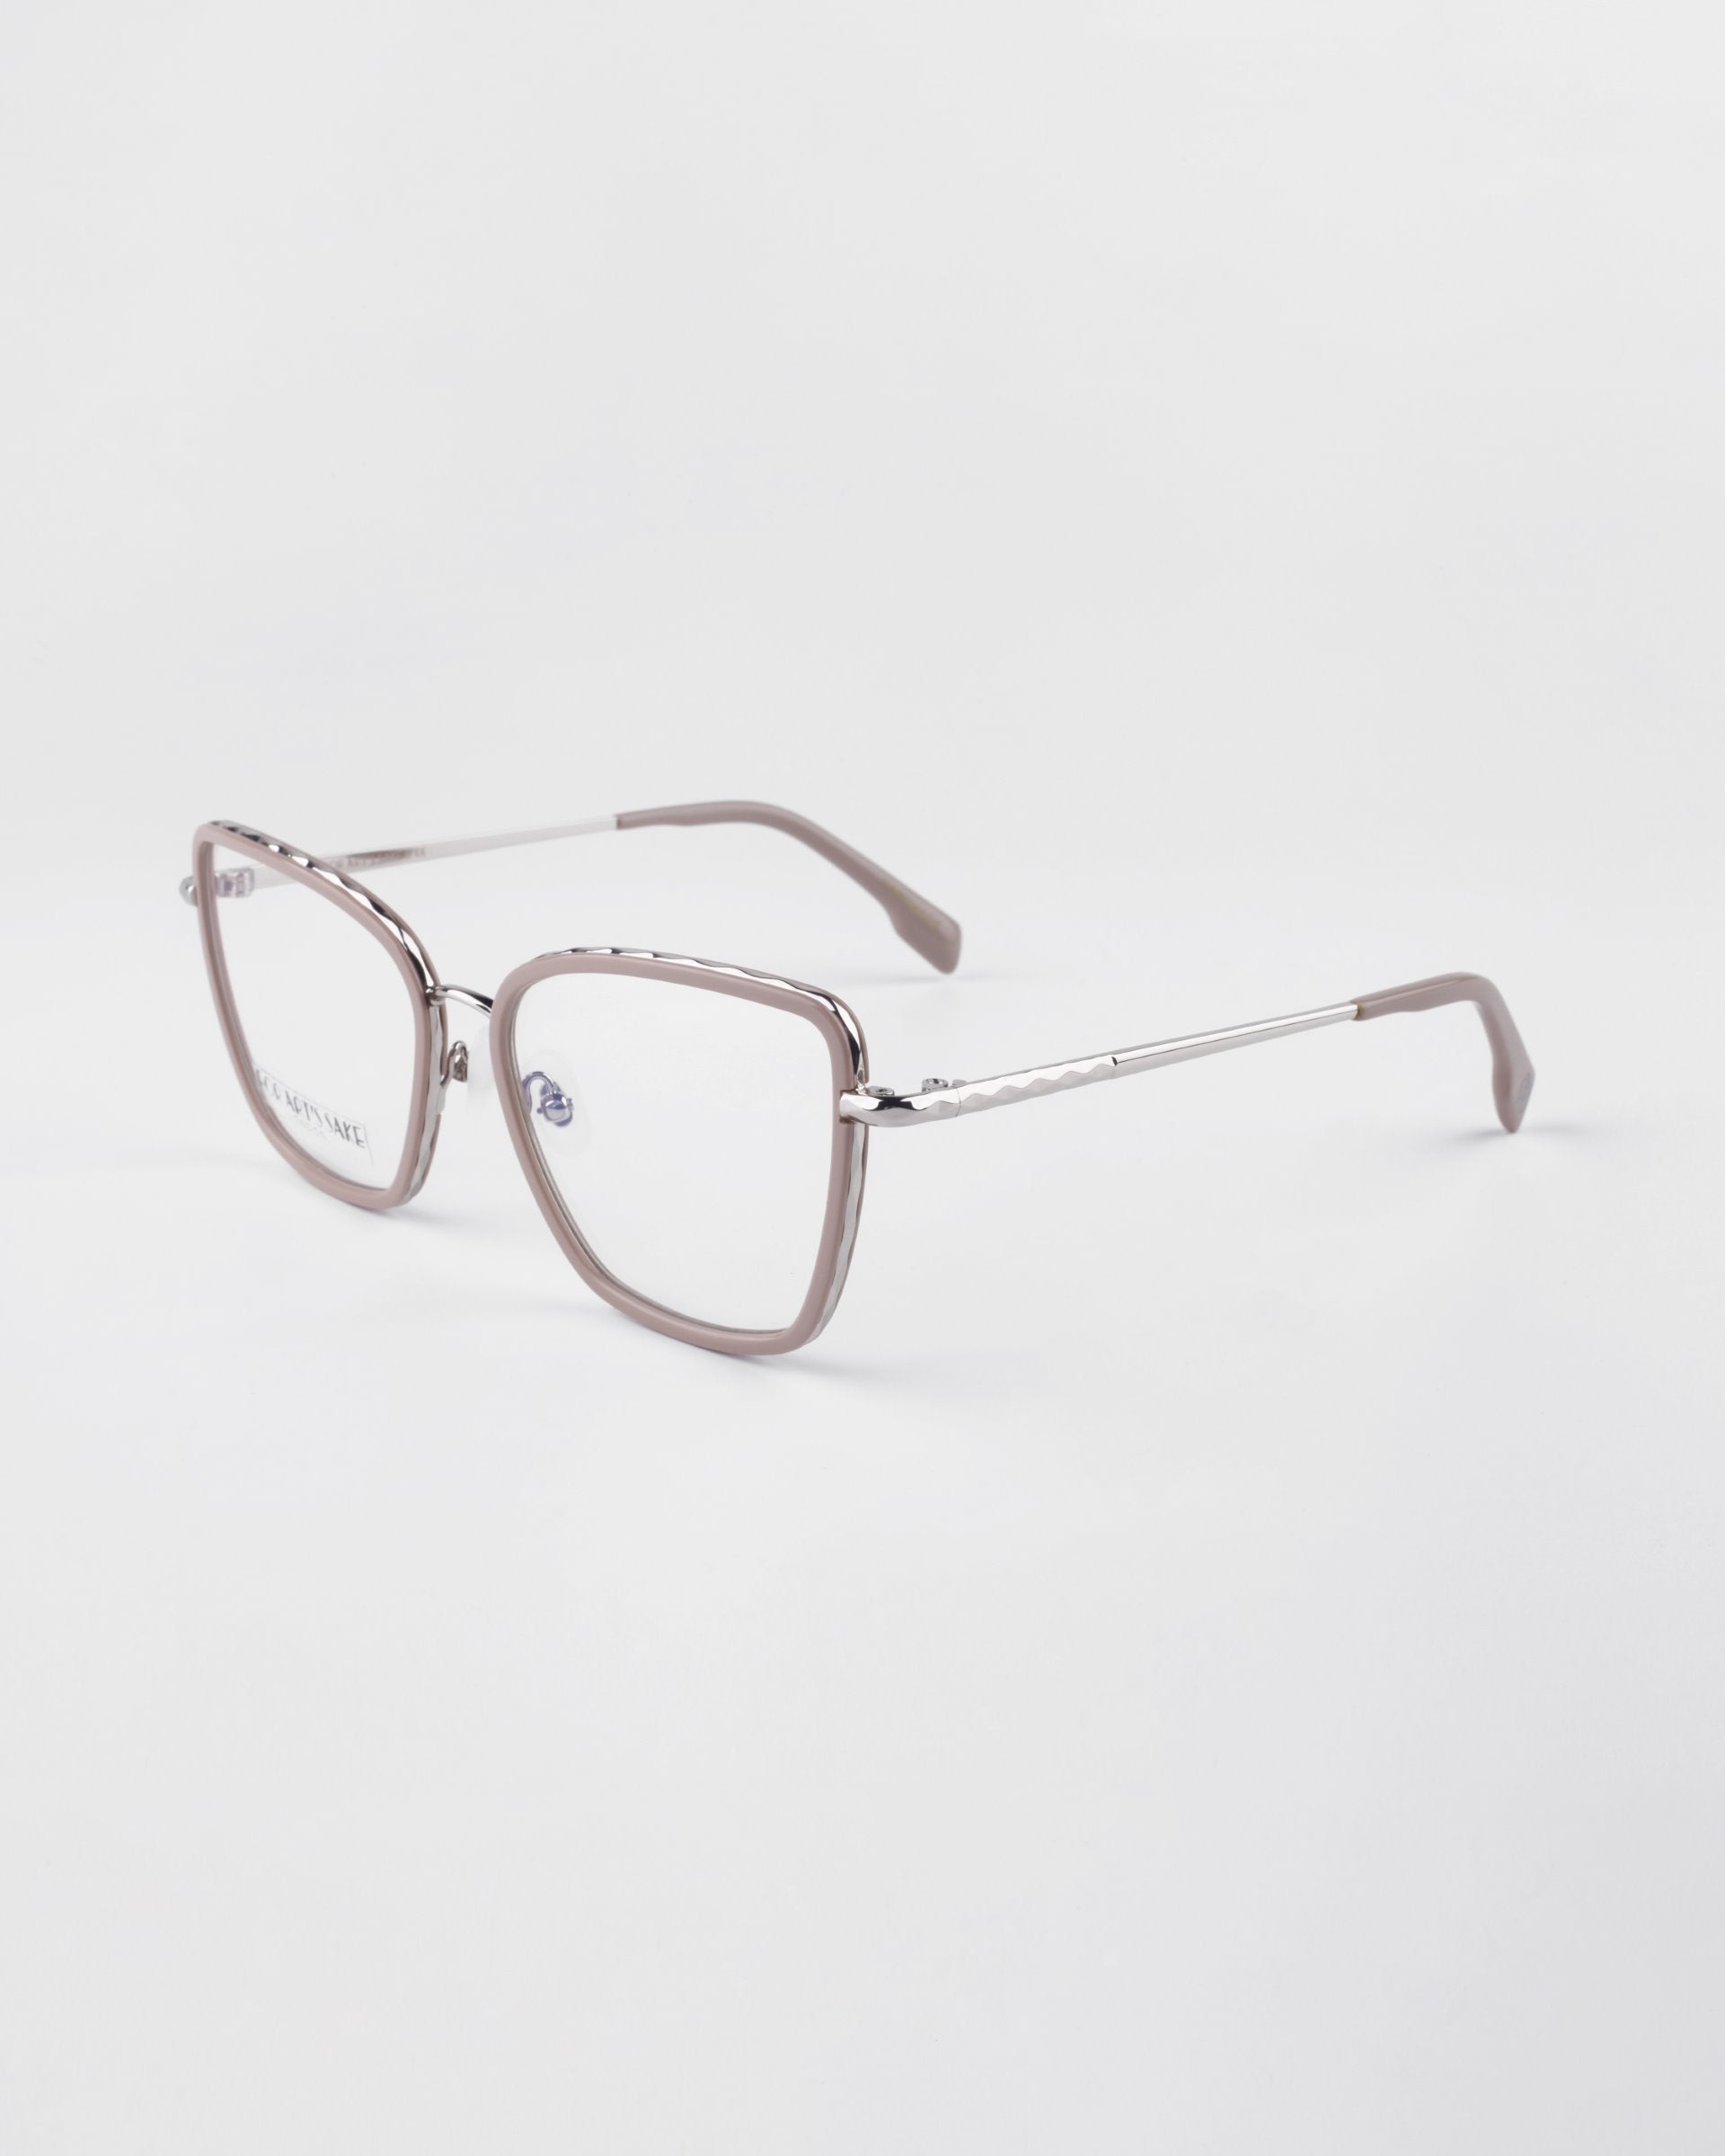 A pair of Lace eyeglasses from For Art&#39;s Sake® with transparent gray frames, thin silver temples, and a blue light filter. The lenses are clear, and the nose pads are adjustable. The background is solid white, showcasing the glasses from a three-quarter angle.